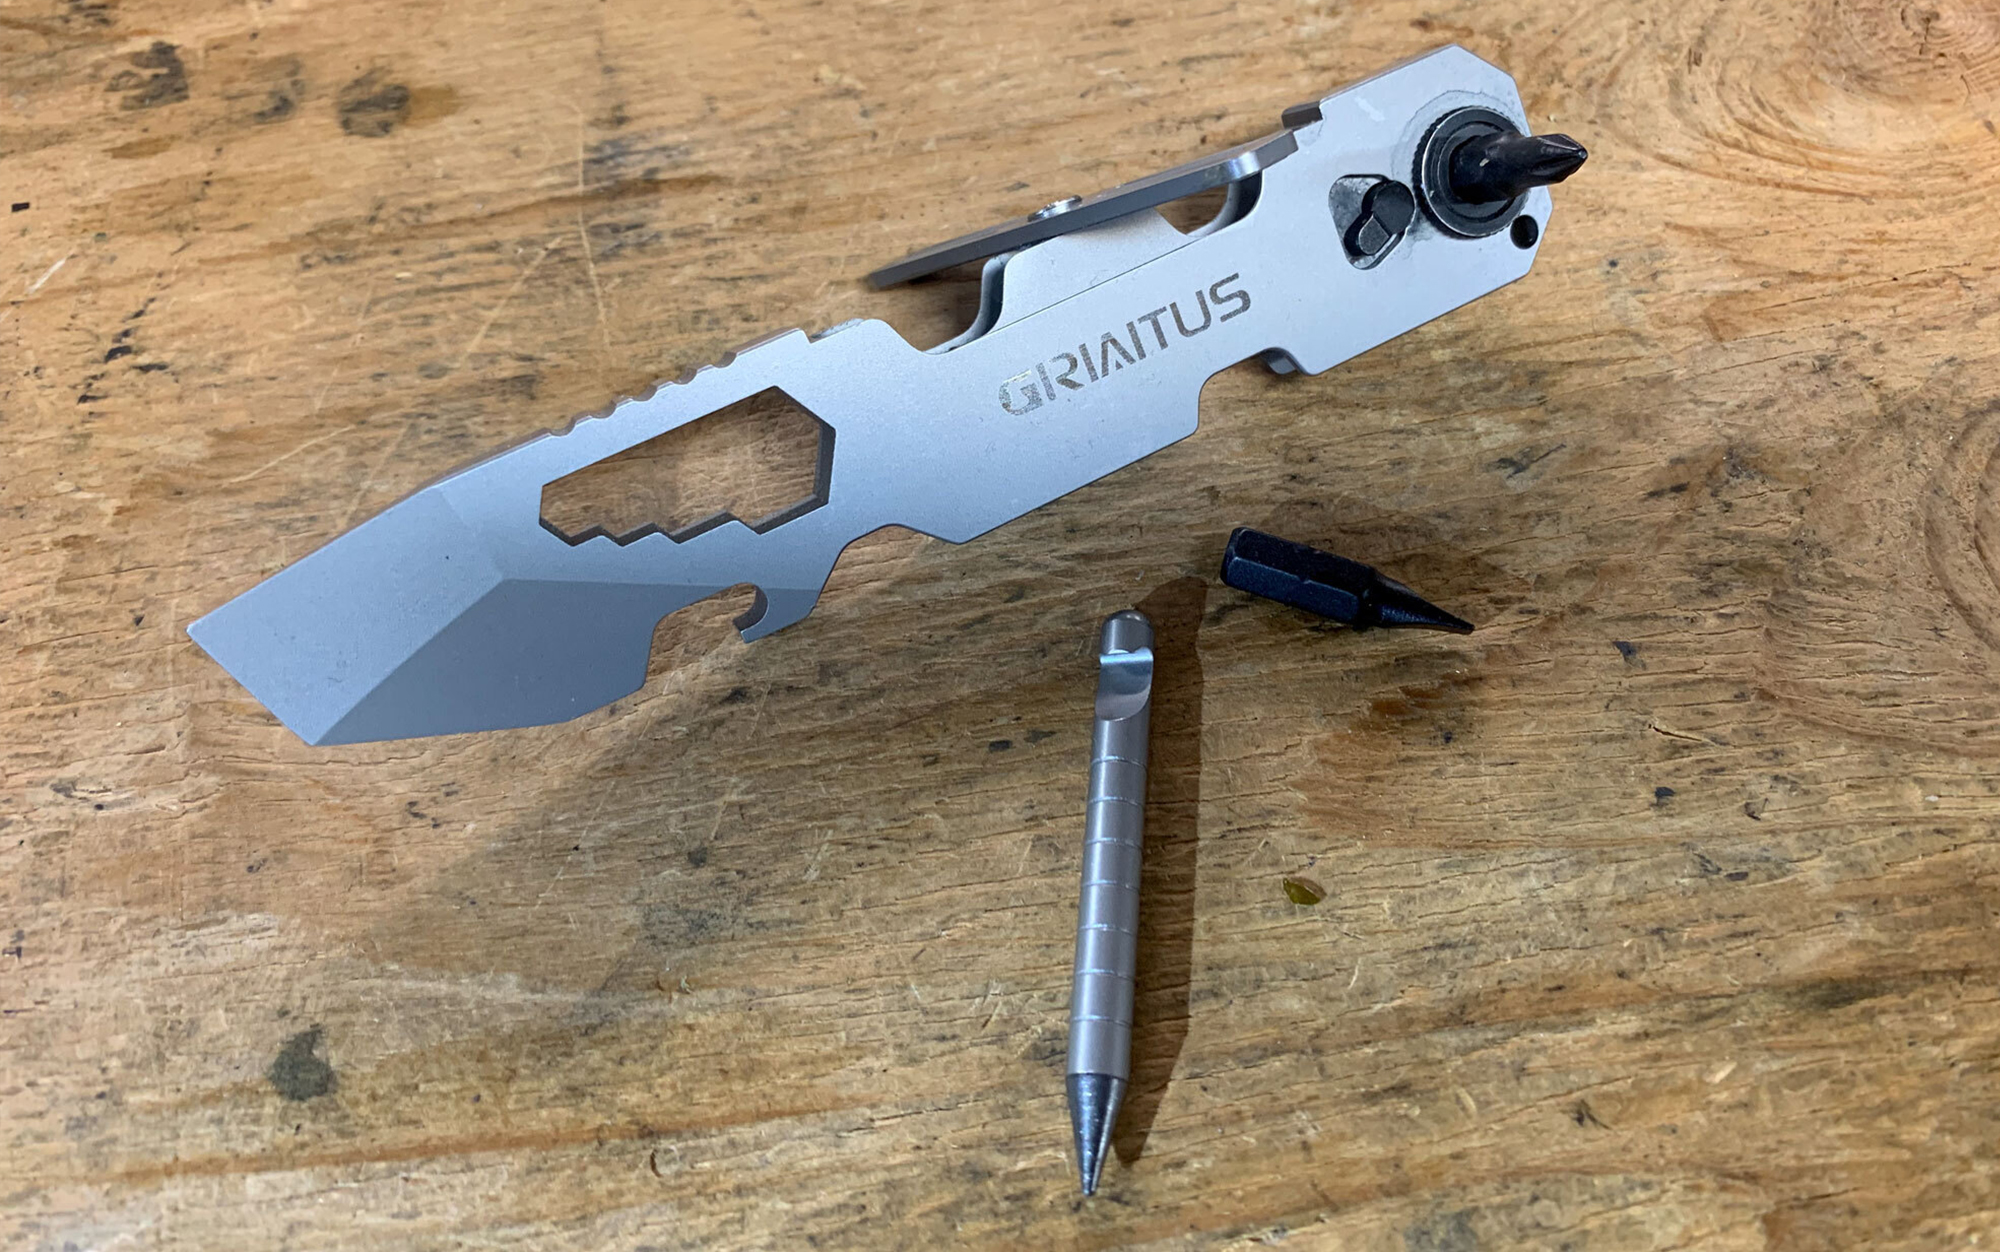 The Griaitus Multitool Pry Bar features a pointed wedge pry bar, multi-sized wrench function, Phillips and flat bits, reversible ratcheting driver, magnetic “eternity pen/pencil,” pocket clip, and bottle opener.